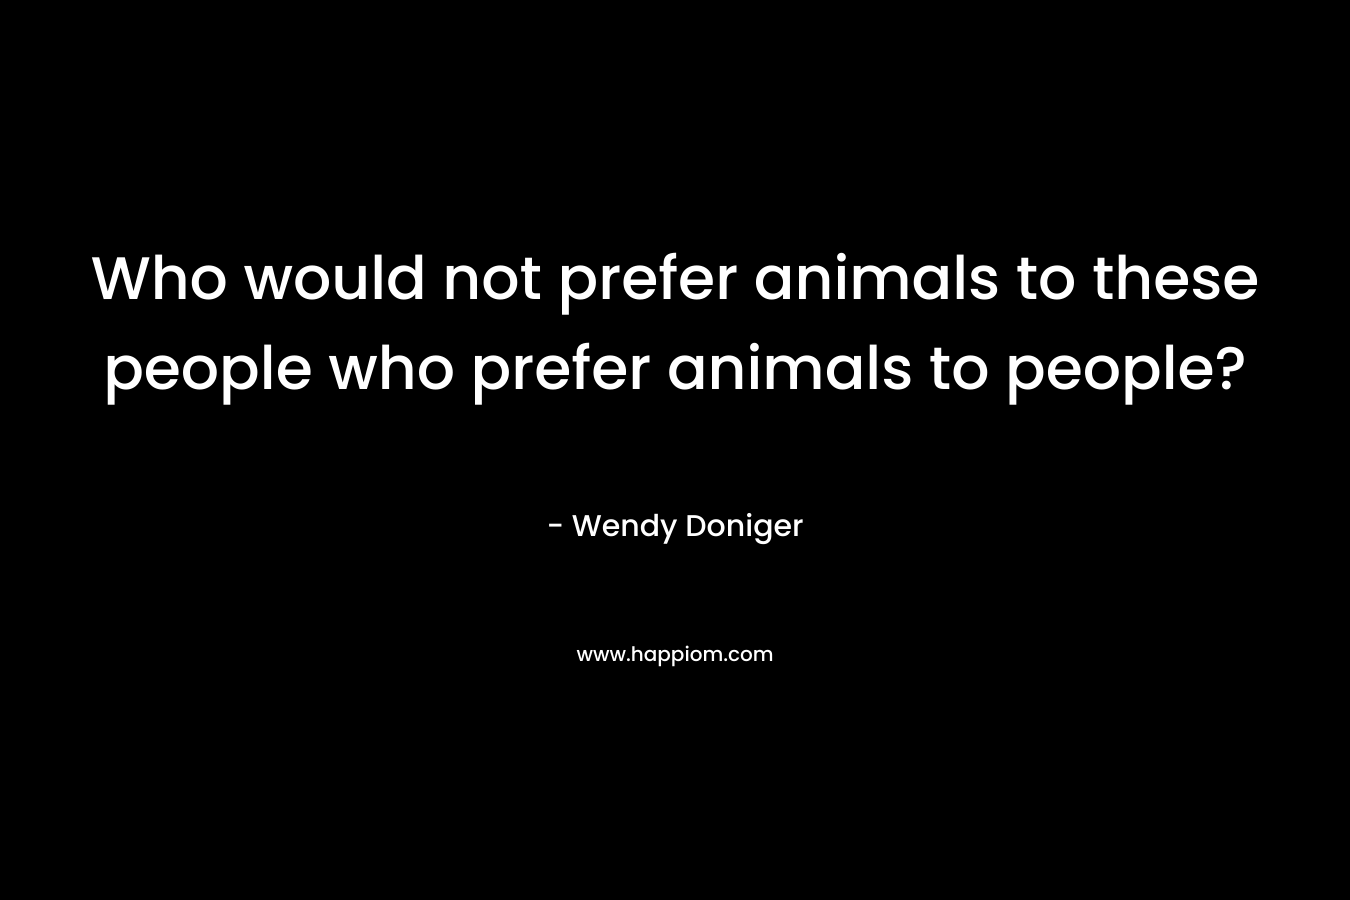 Who would not prefer animals to these people who prefer animals to people?